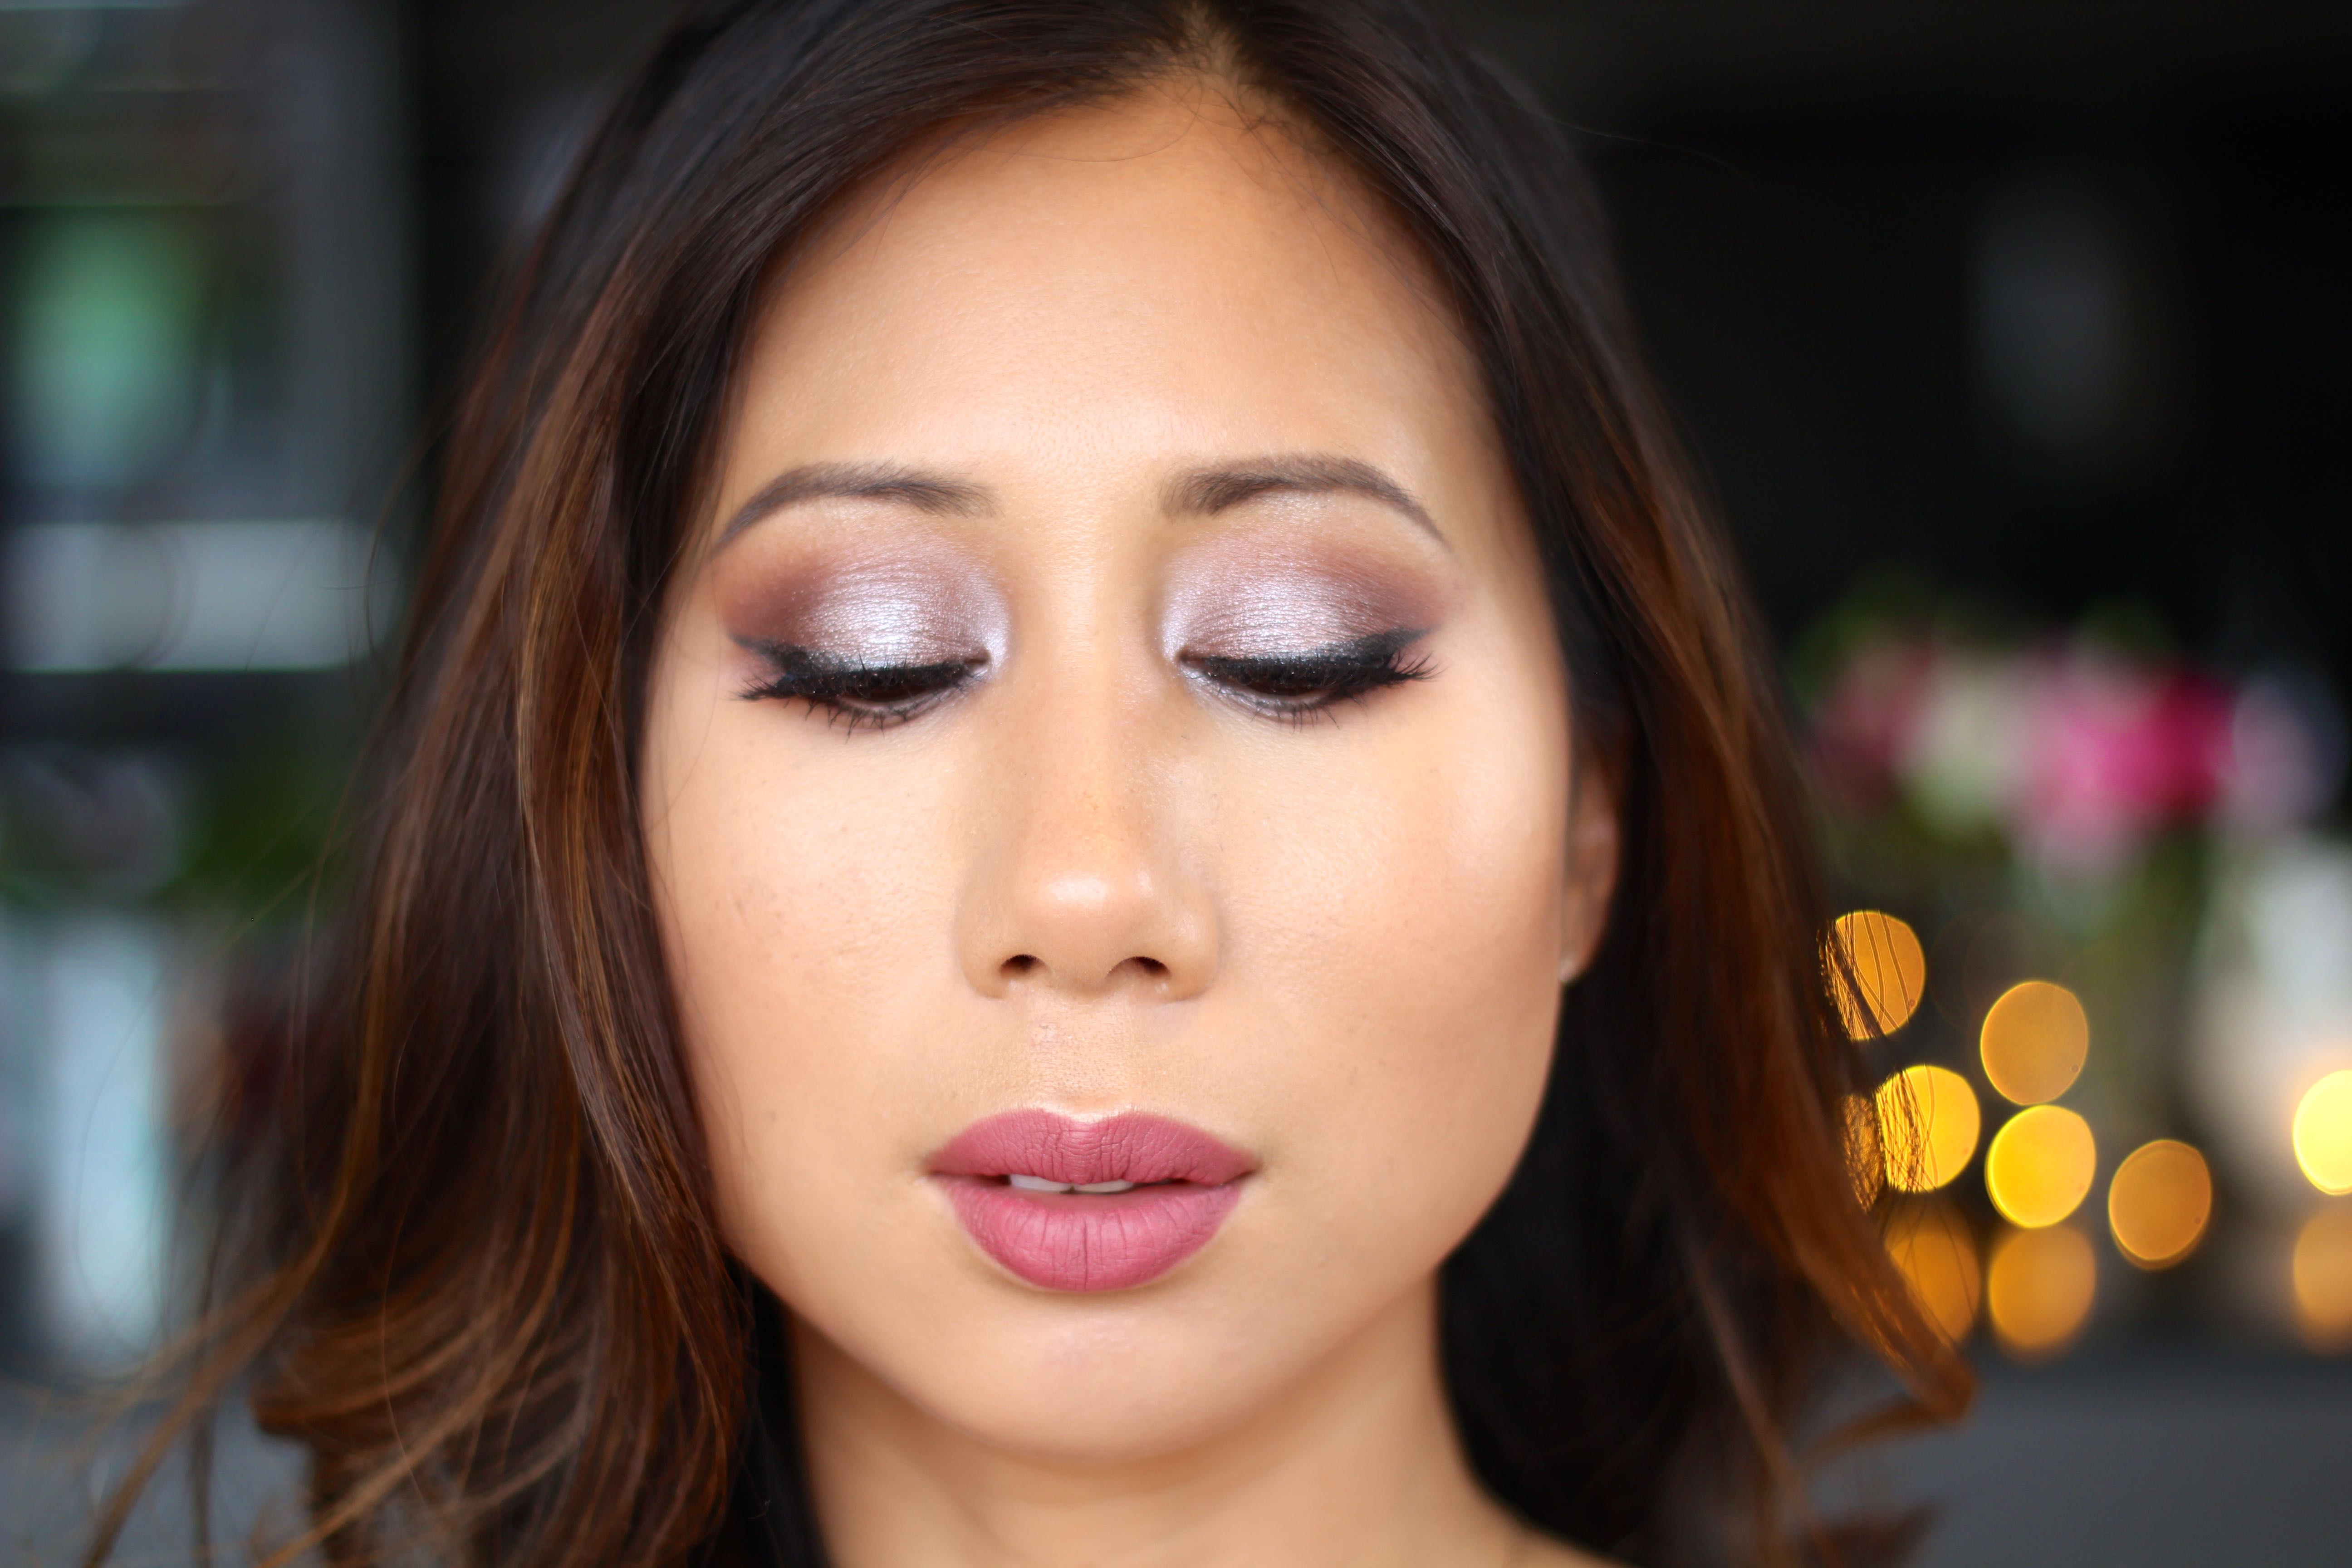 Cool Tone Eyes featuring Makeup Geek Foiled Eyeshadow in Wisteria by Face Made Up